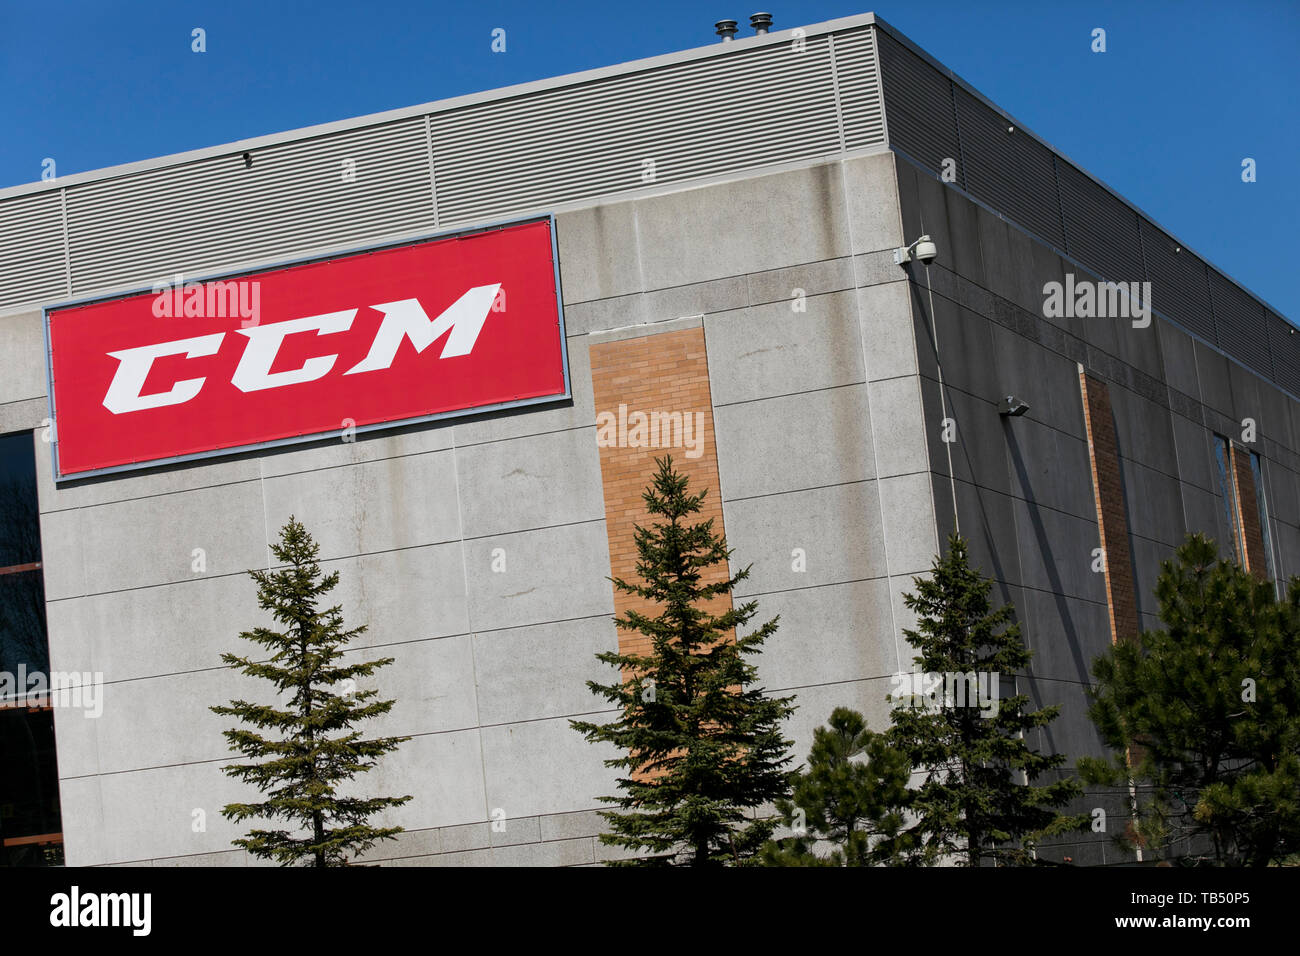 A logo sign outside of a facility occupied by Sport Maska Inc. (CCM Hockey) in Saint-Laurent, Quebec, Canada, on April 21, 2019. Stock Photo